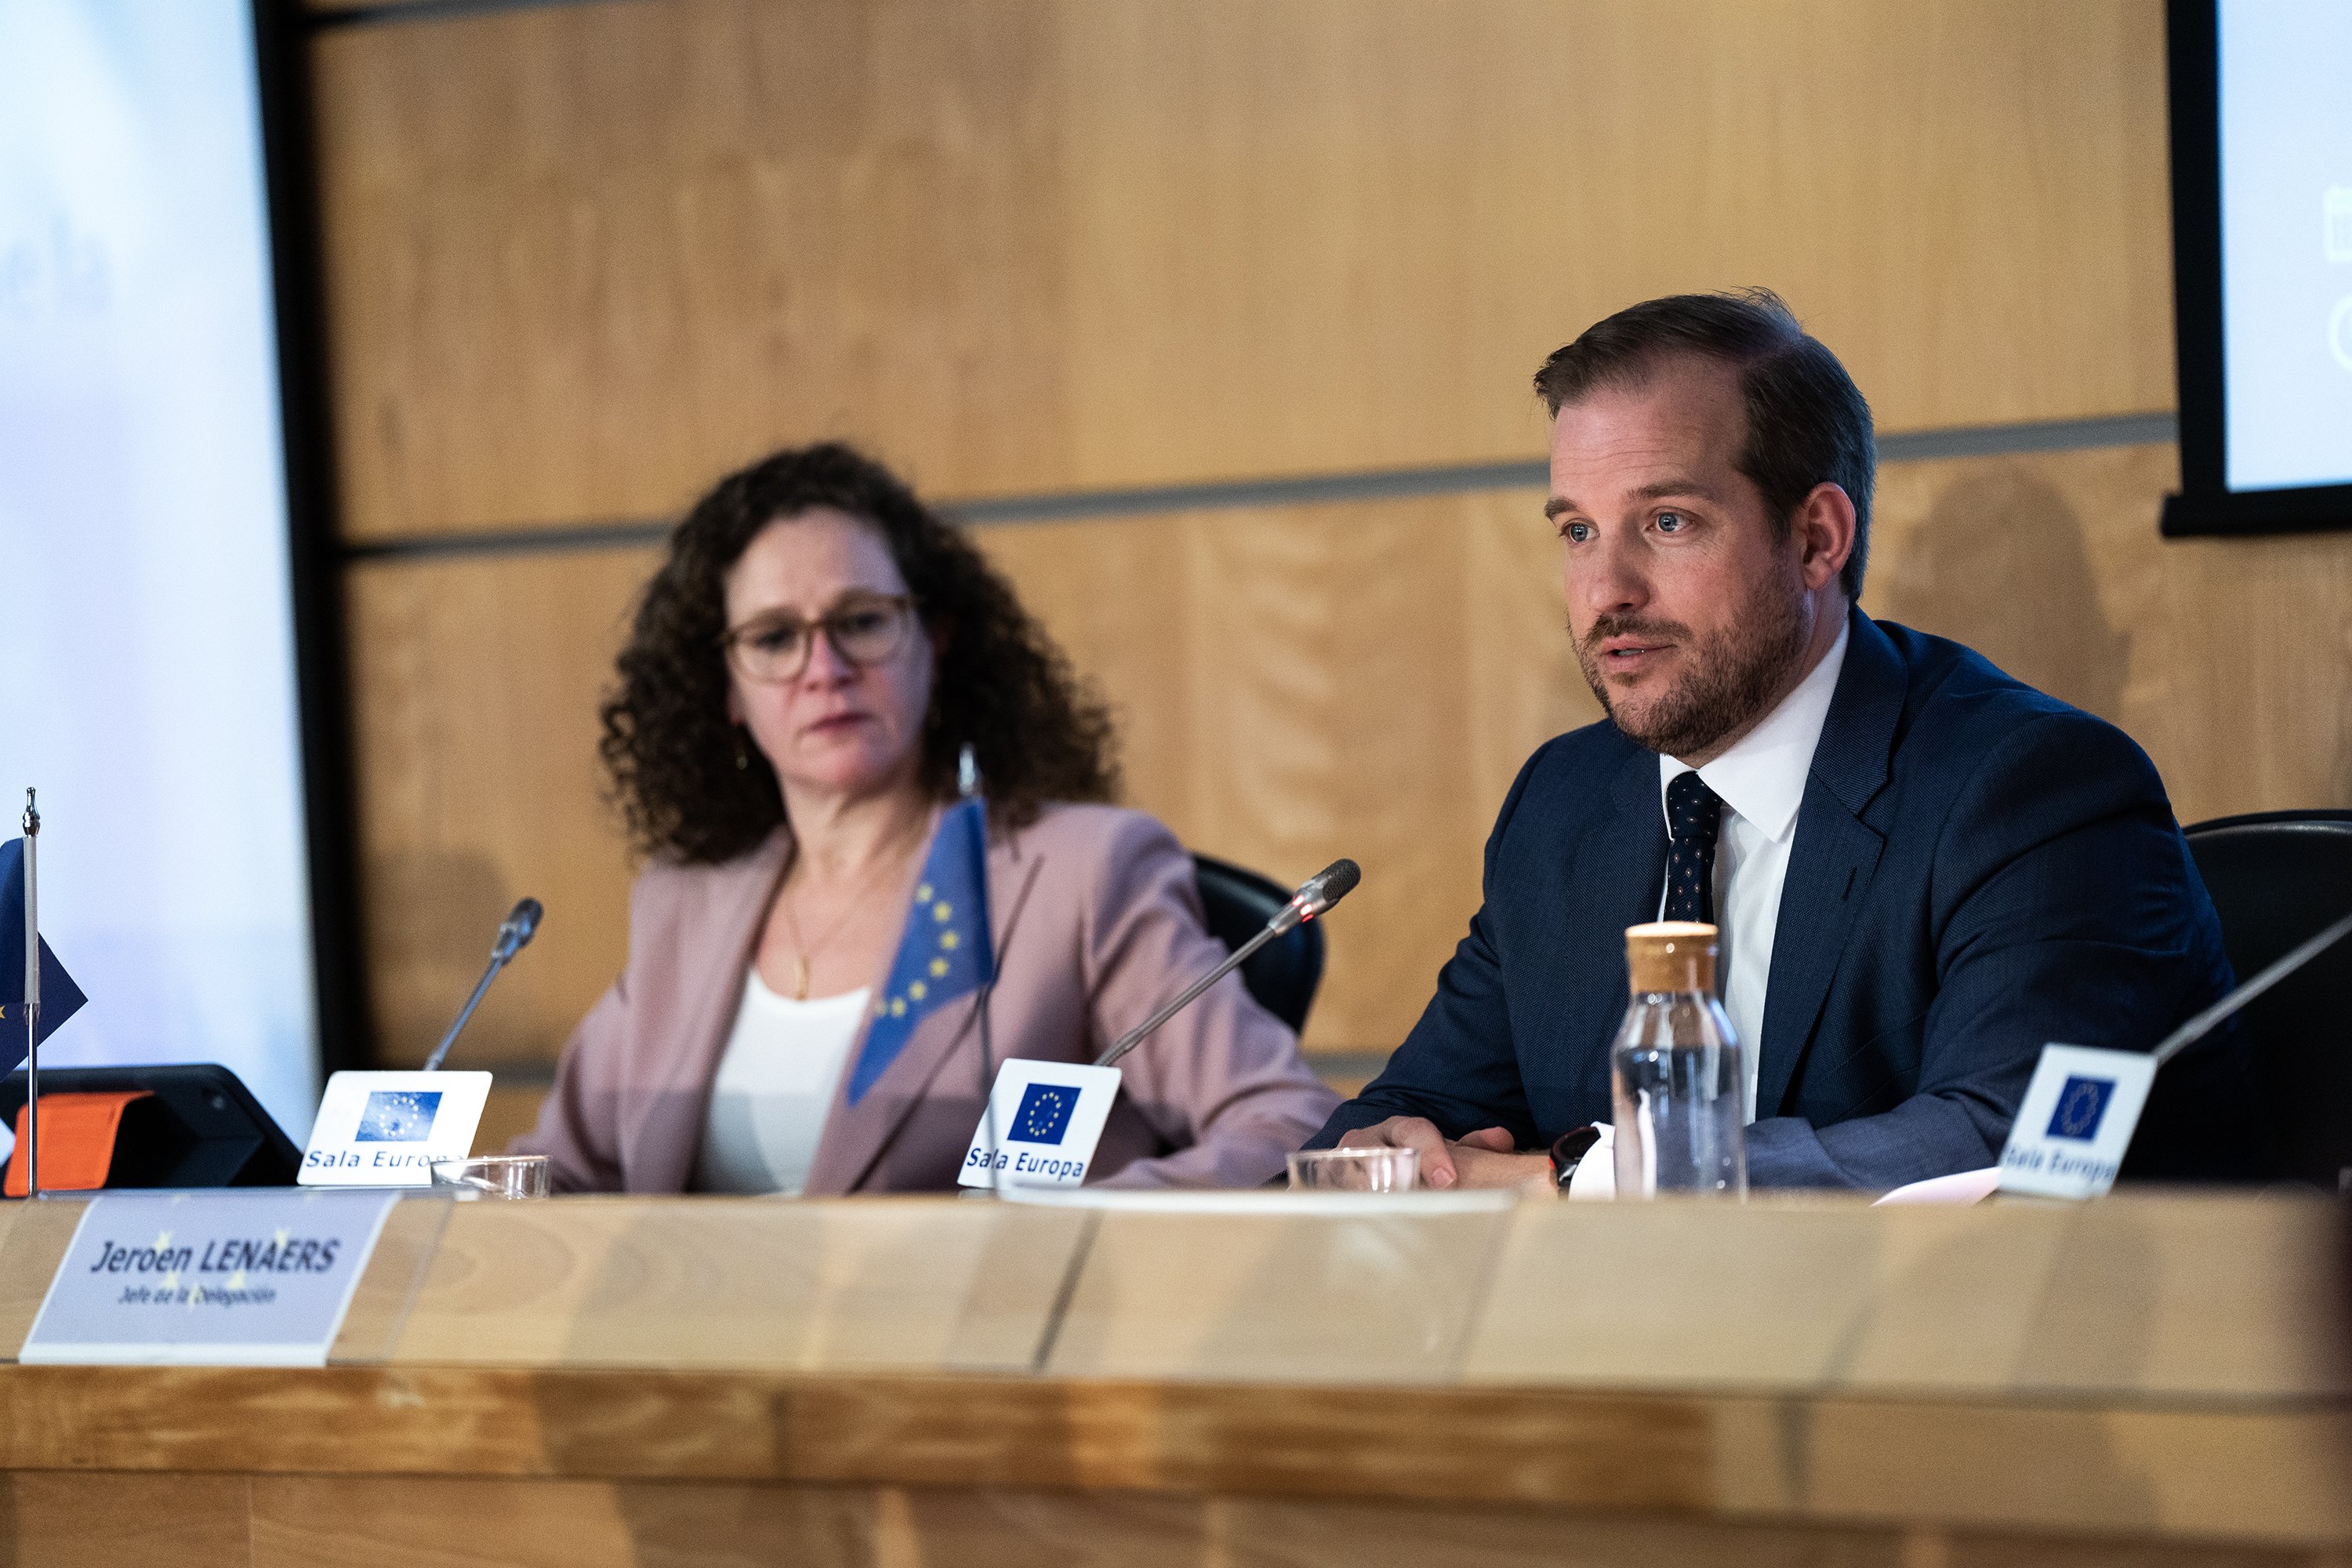 Pegasus committee rebukes Spanish government: "We haven't received significant information"